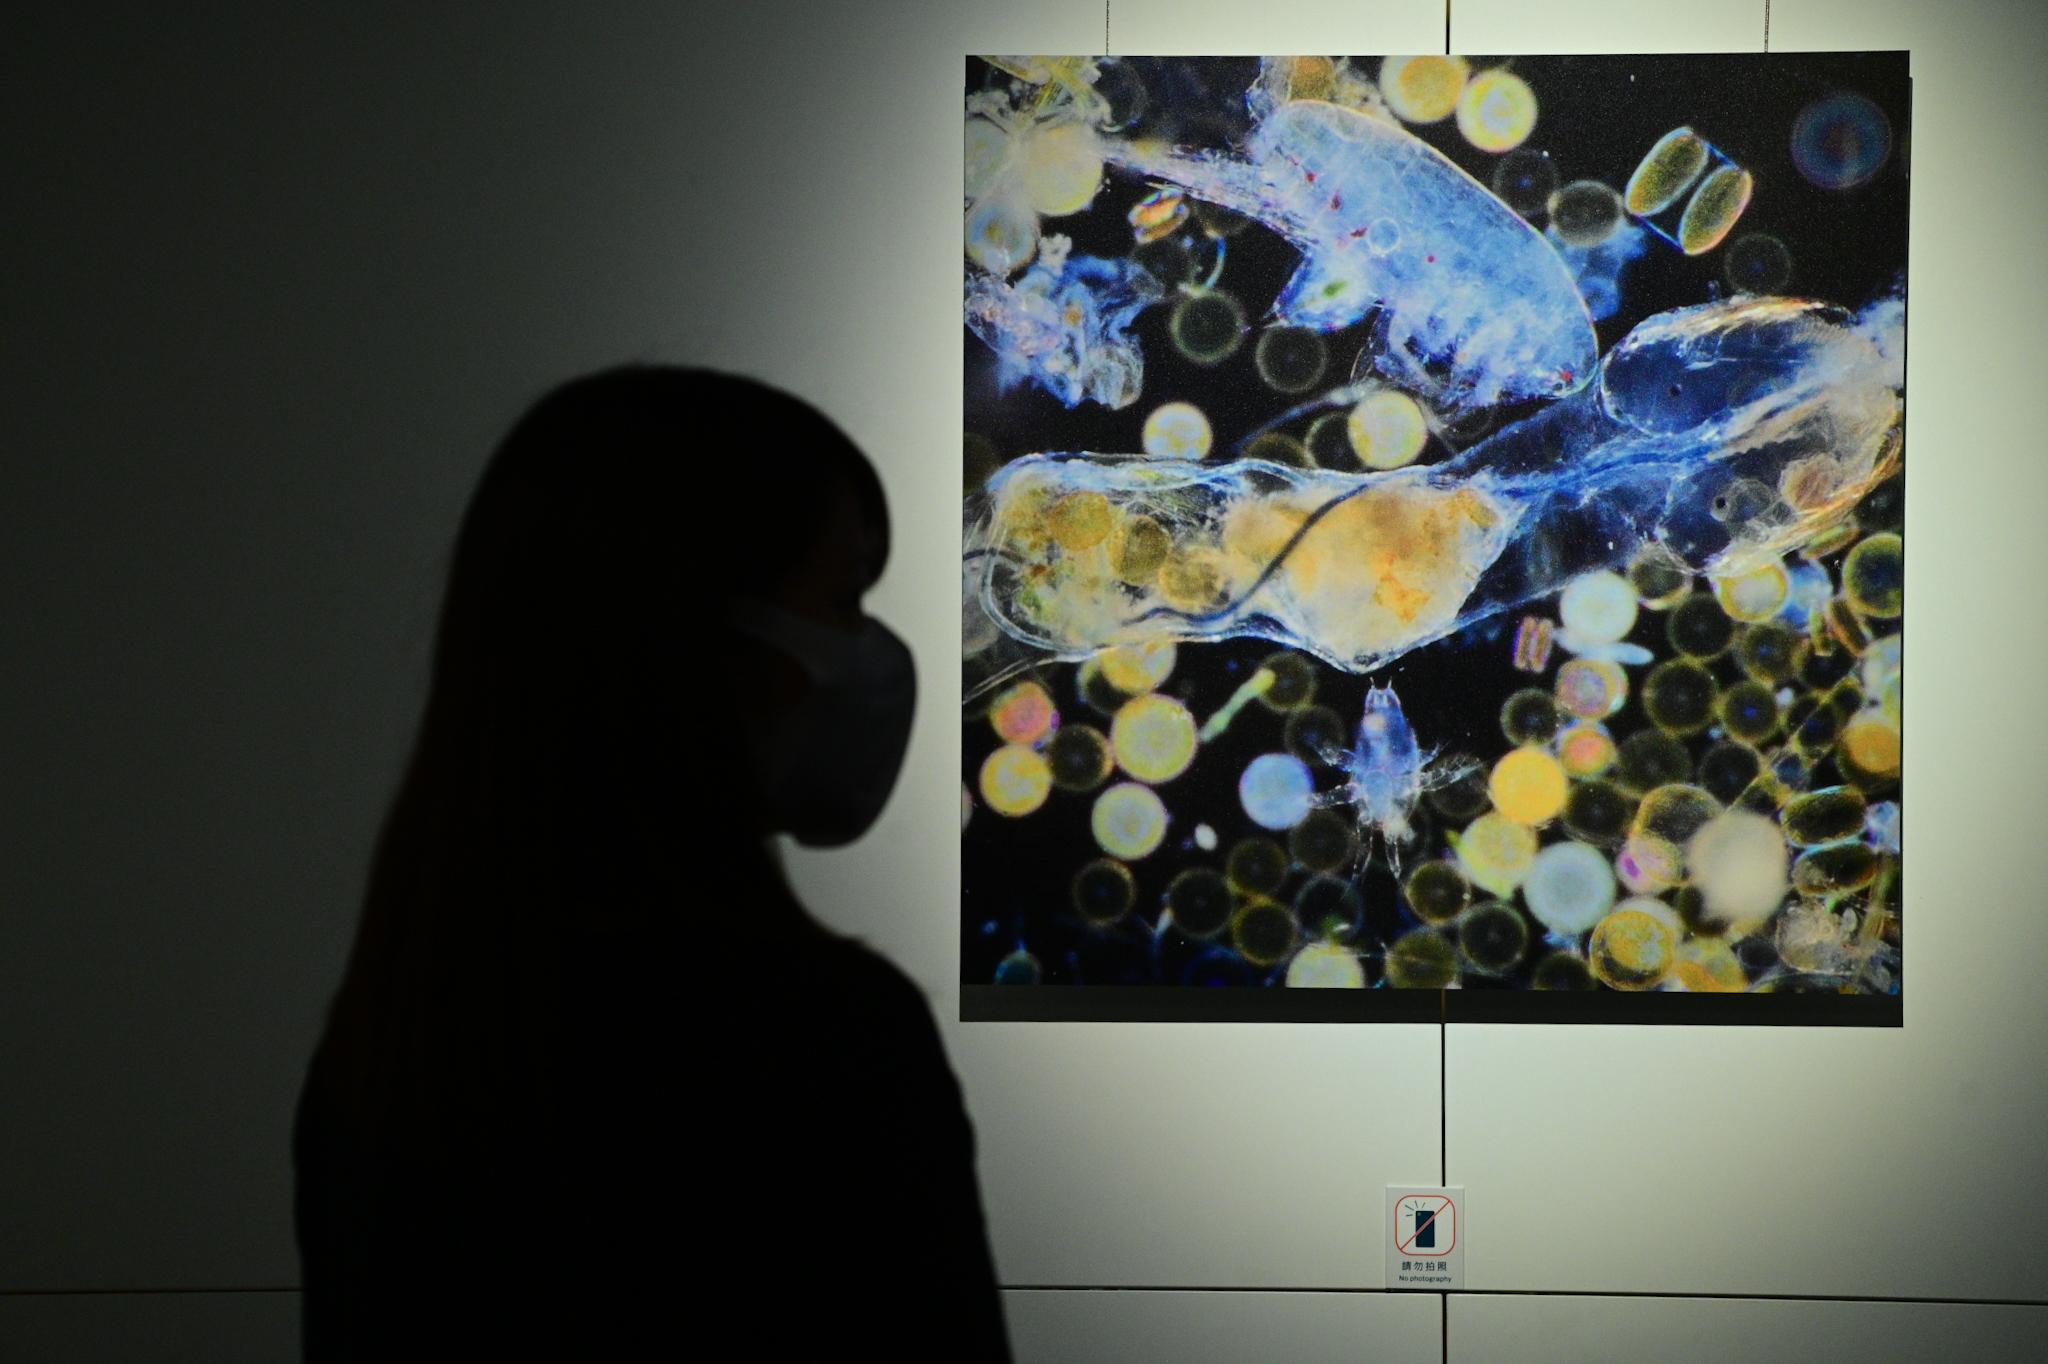 The exhibition “The Invisible Becomes Visible”, a highlight programme of French Science Festival: [BIO]diversity, will be staged at the Hong Kong Science Museum from tomorrow (November 11) to November 27. Picture shows a photograph of microplastics, presenting the importance of plankton in the functioning of living organisms.